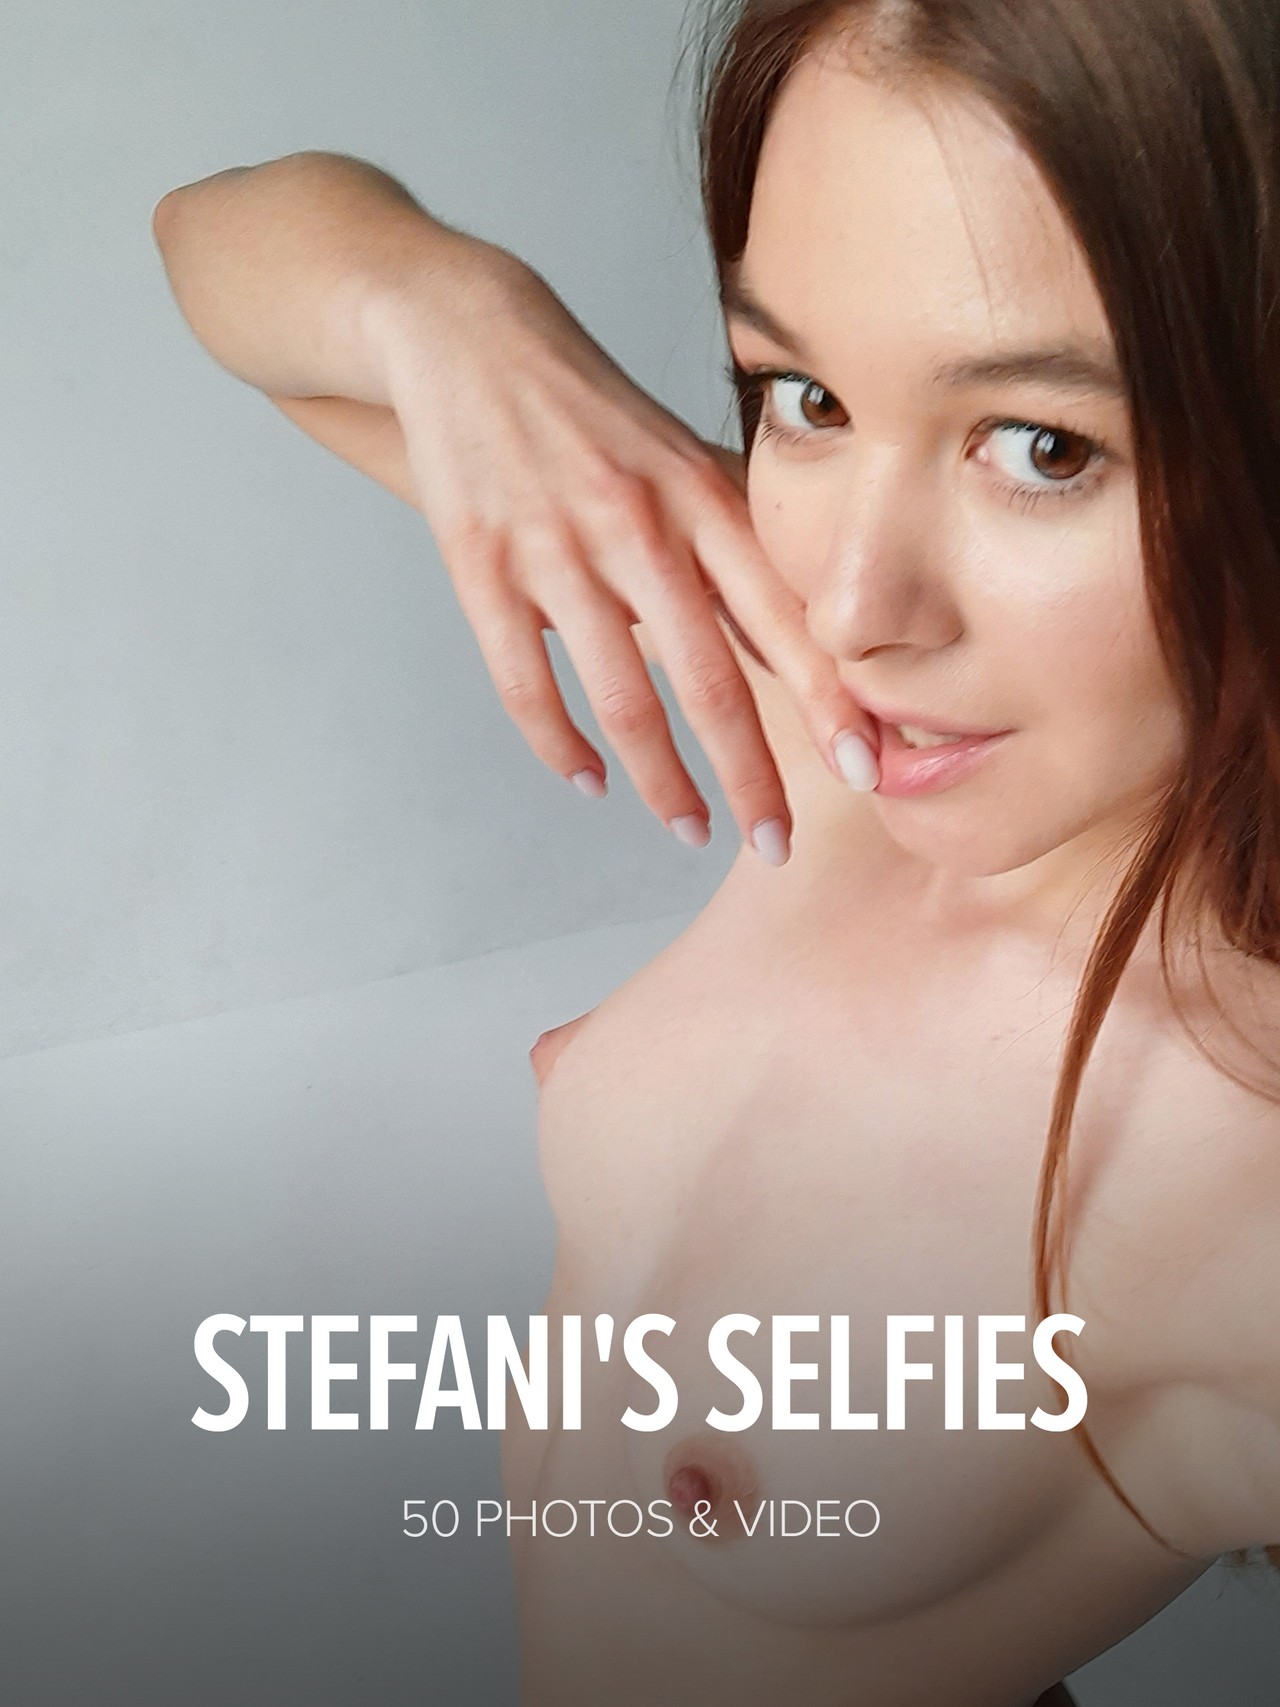 Stefani loves to make selfies, so while we were shooting the casting with her, we have asked her to snap some selfies for us and she